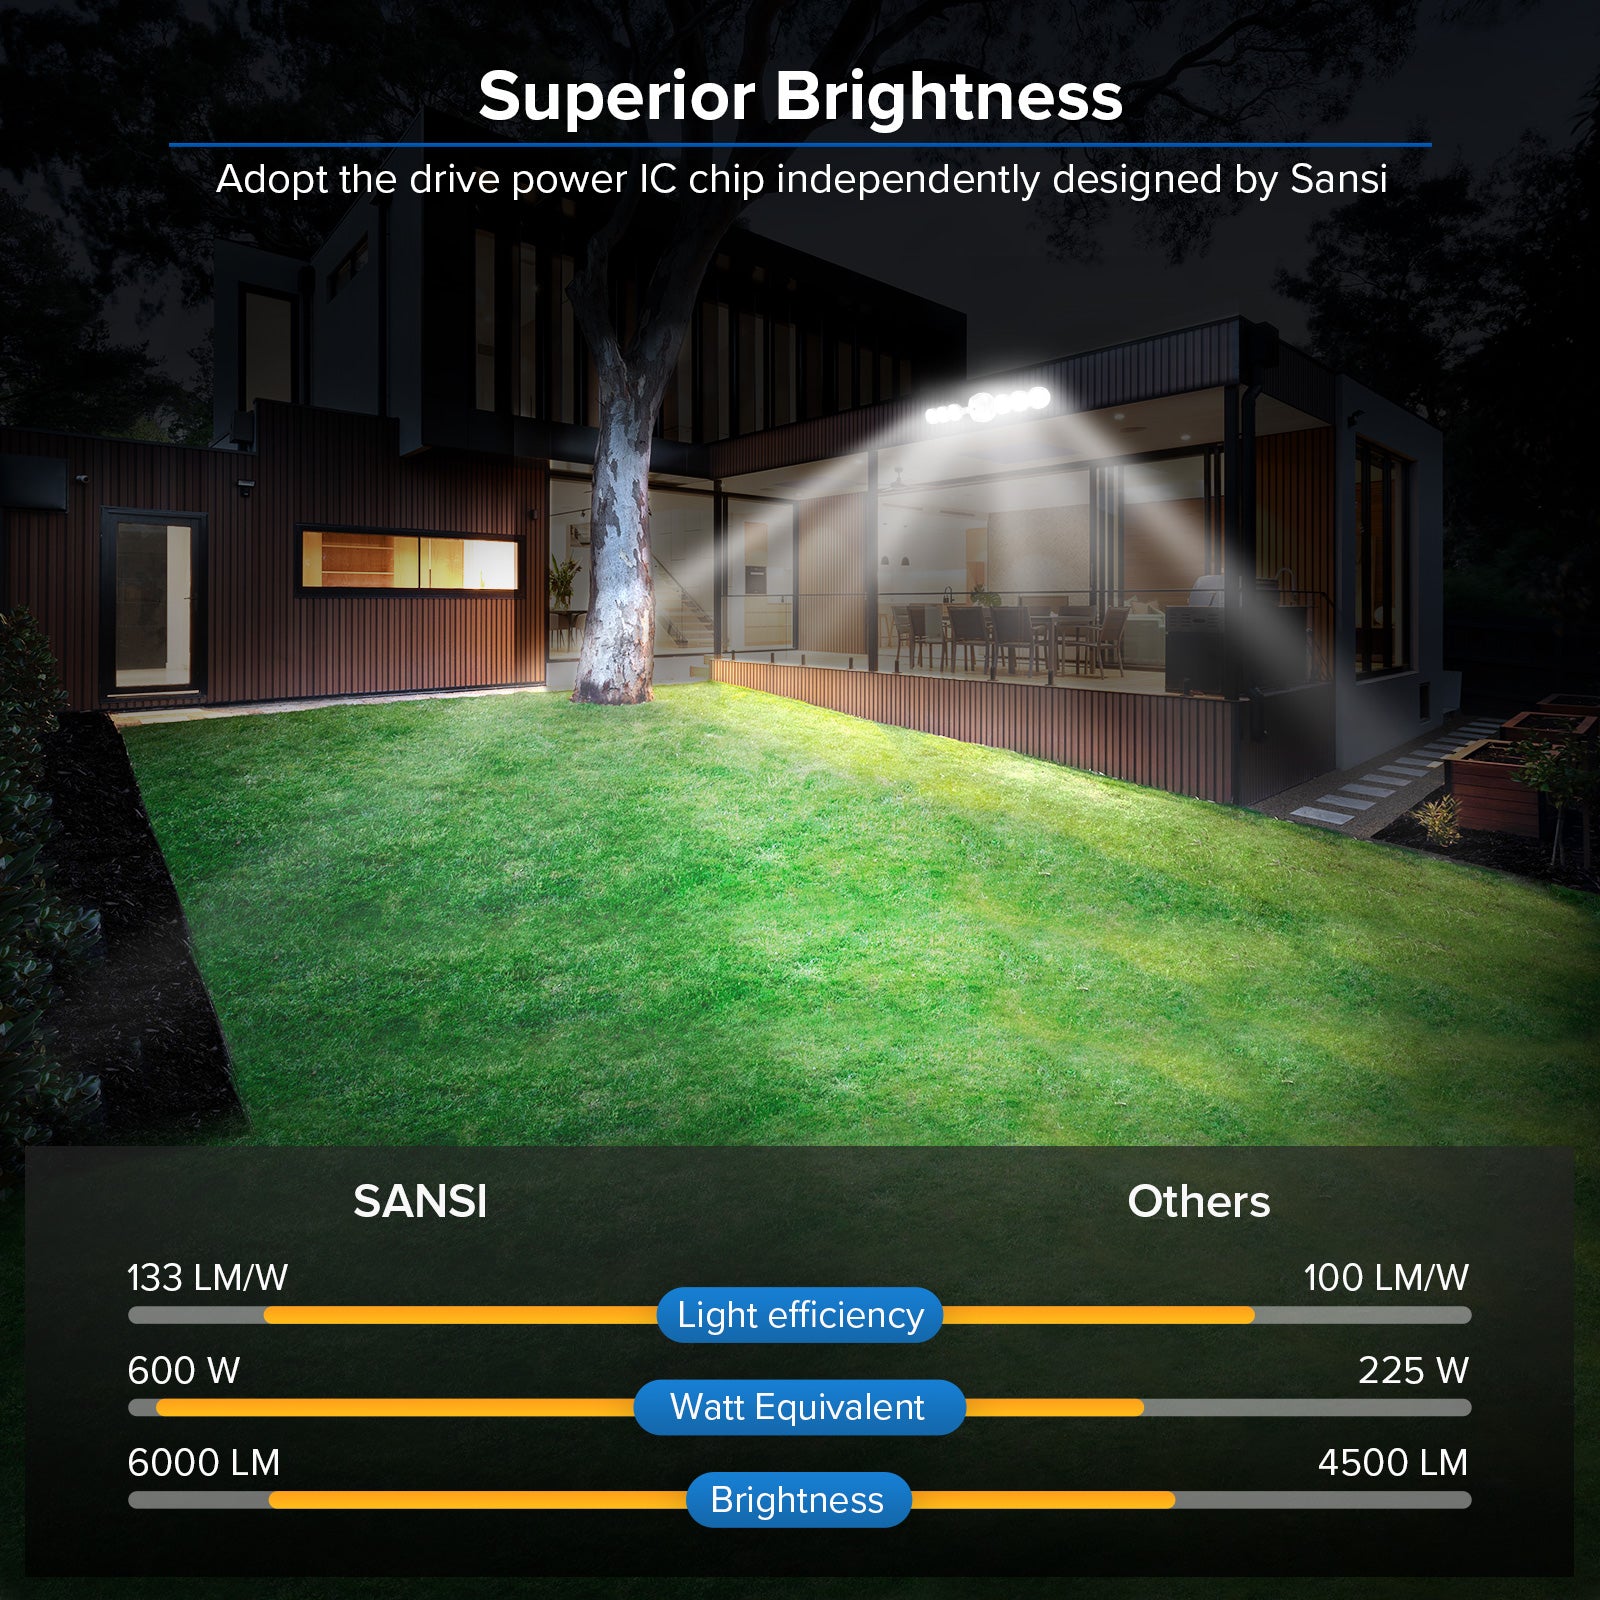 45W LED Security Light (Dusk to Dawn) adopt the drive power IC chip independantly designed by SANSI, superior brightnesss